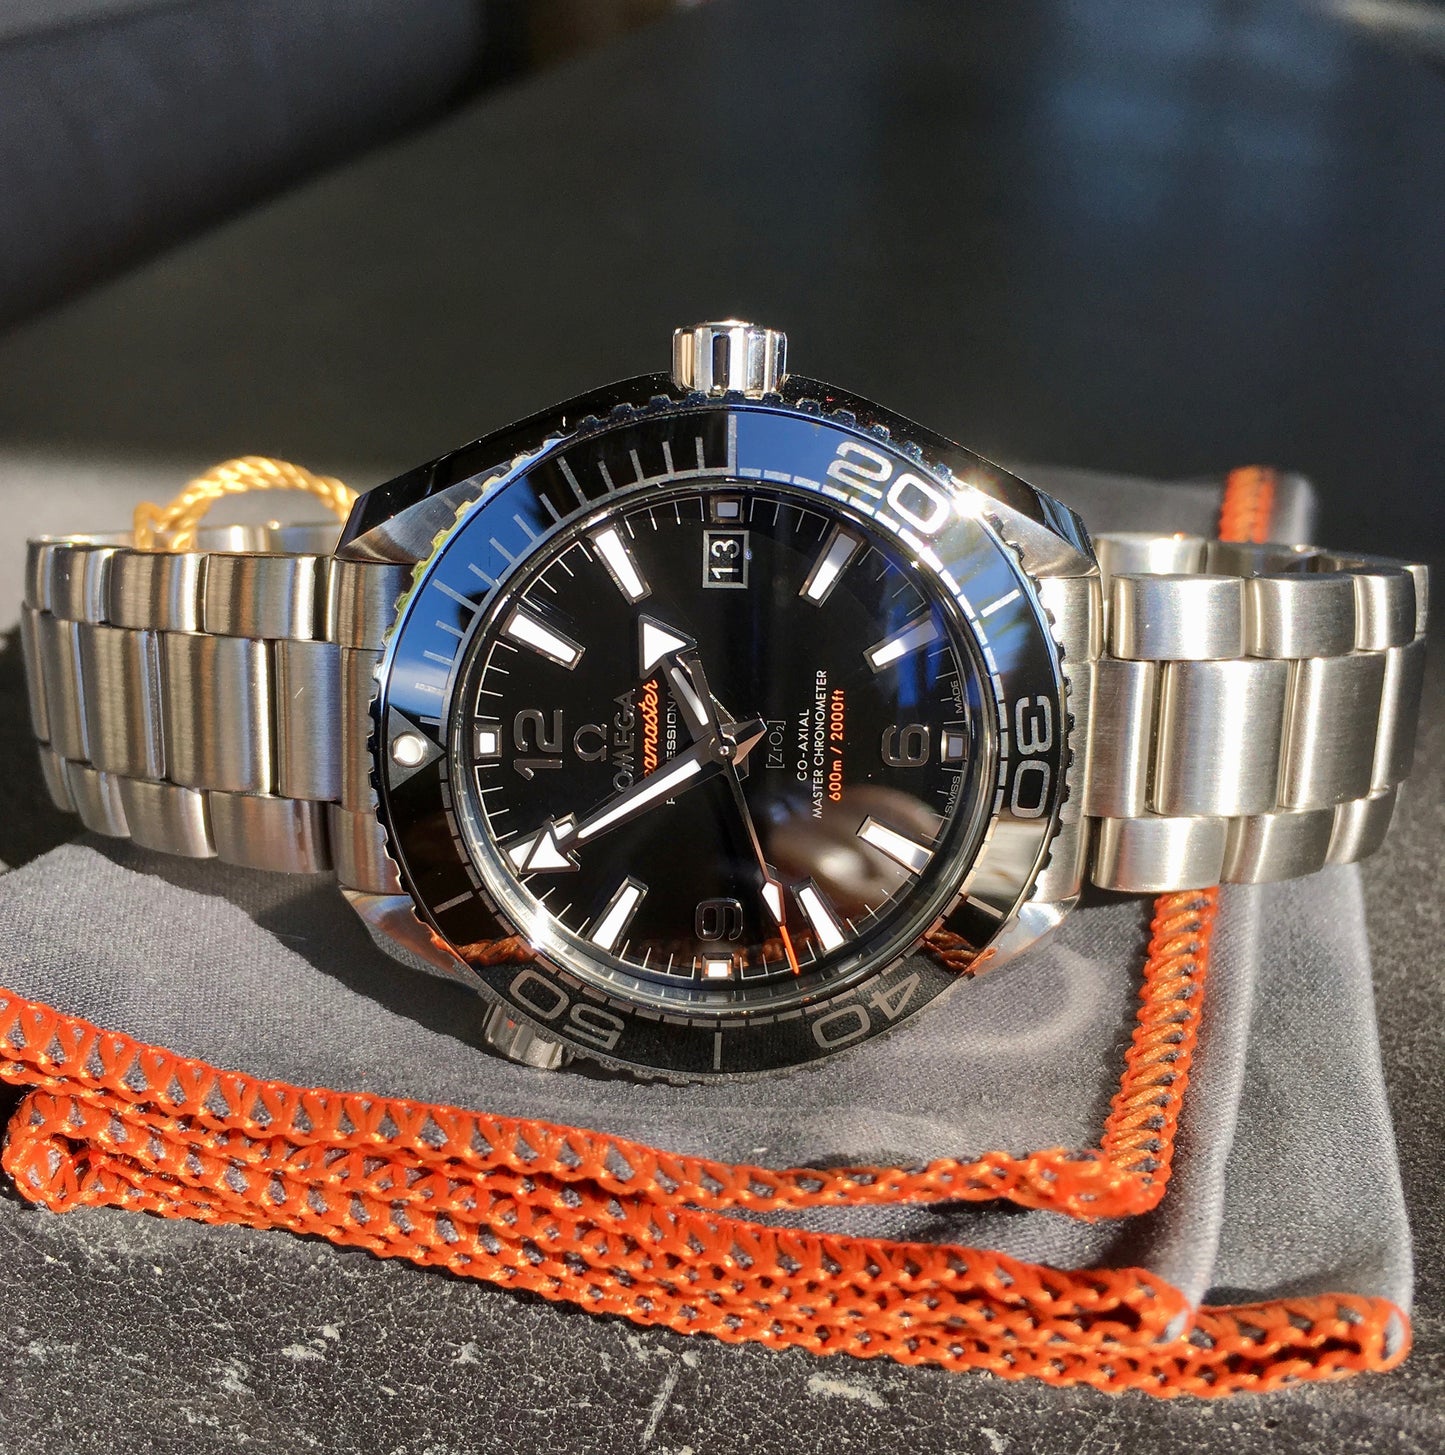 Omega Seamaster 215.30.40.20.01.001 Planet Ocean 600M Automatic Watch - Hashtag Watch Company